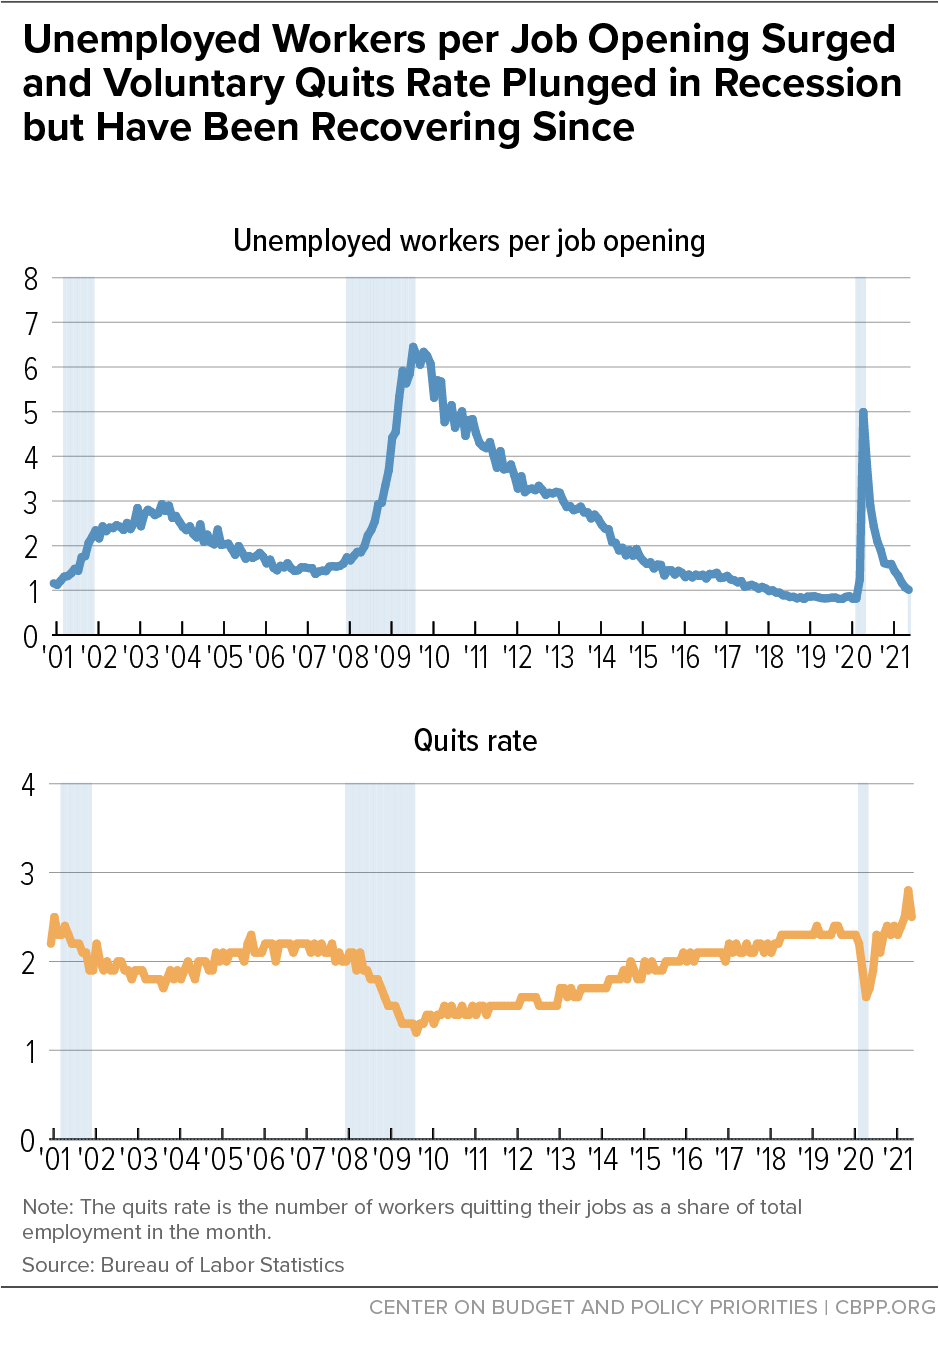 Unemployed Workers per Job Opening Surged and Voluntary Quits Rate Plunged in Recession but Have Been Recovering Since